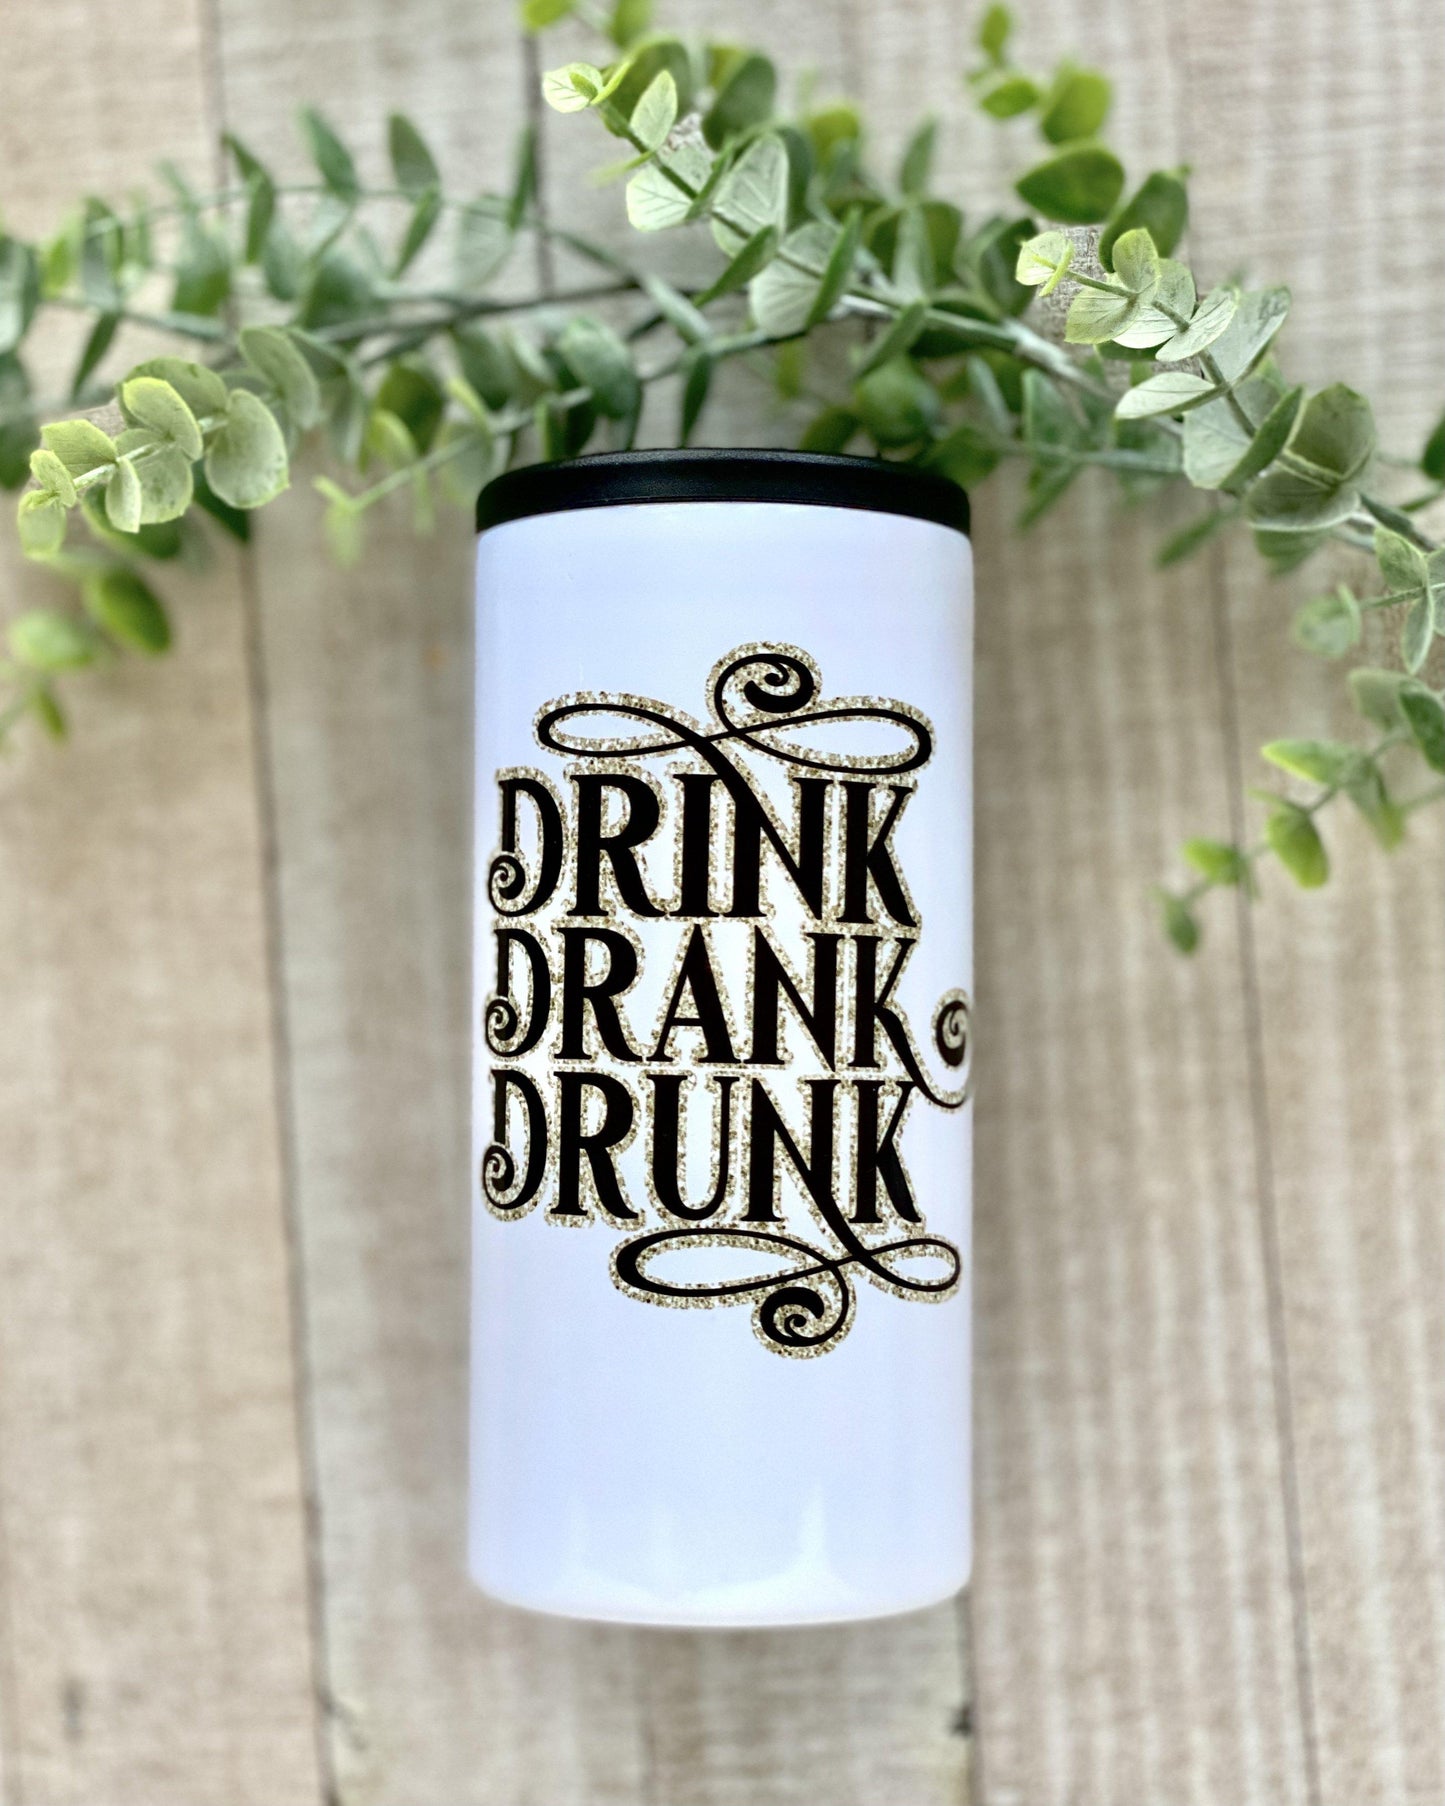 Drink Drank Drunk - 12oz Slim Can Cooler - Stainless Steel Tumbler -  Rustic Cuts